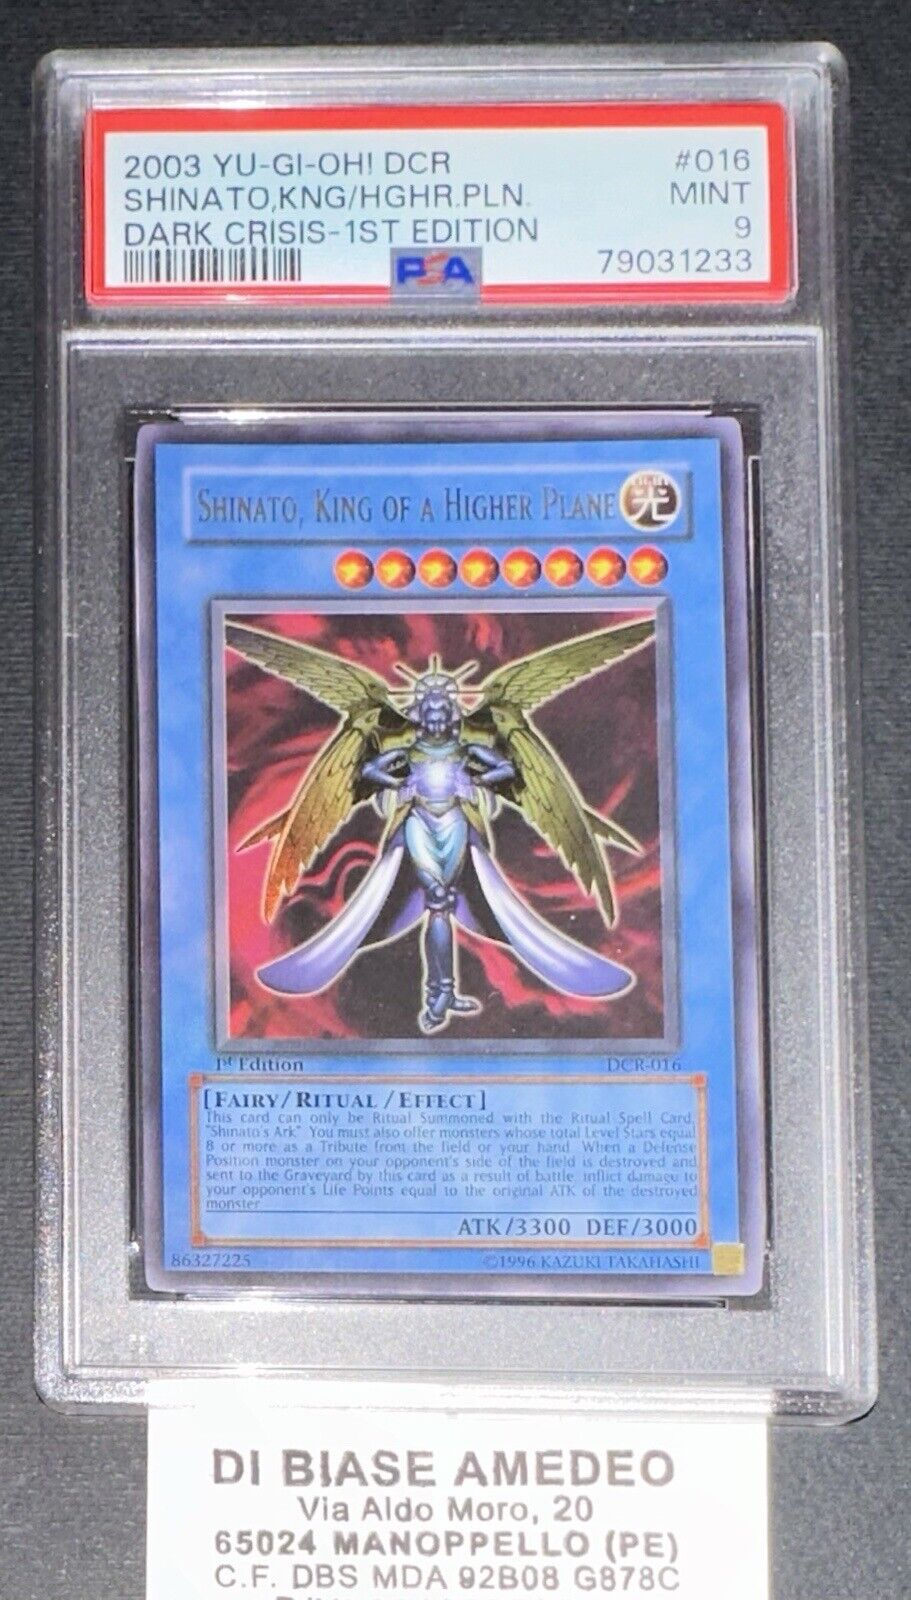 PSA 9 SHINATO,KING OF A HIGHER PLANE DCR-016 1st FIRST EDITION DARK CRISIS ENGL